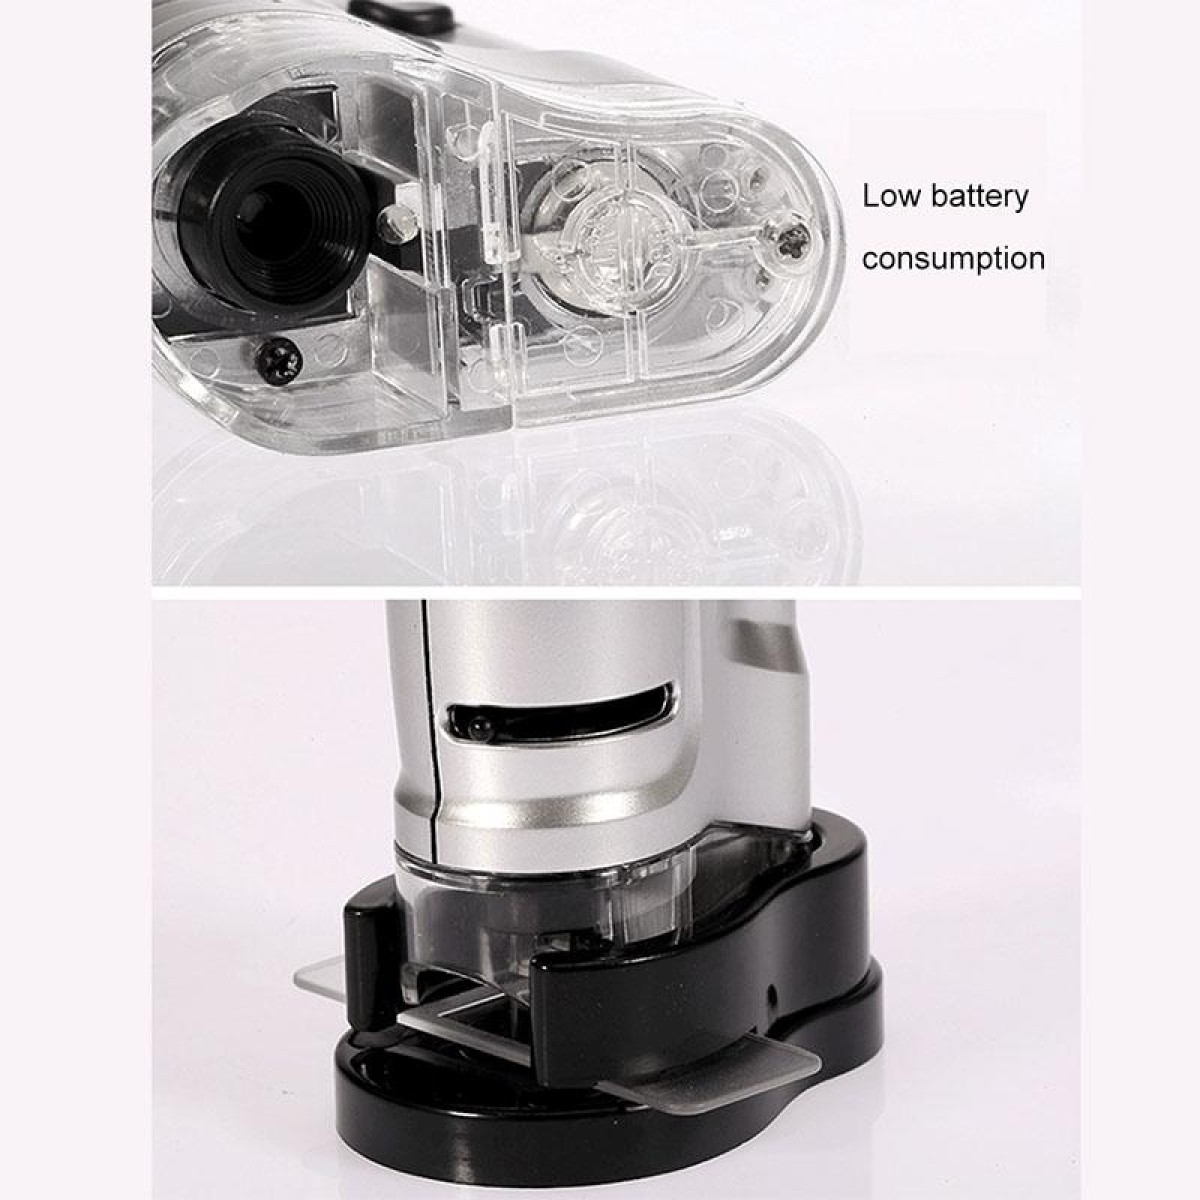 20X - 40X Magnification Zoom Lens Pocket Microscope with LED Light(Silver)